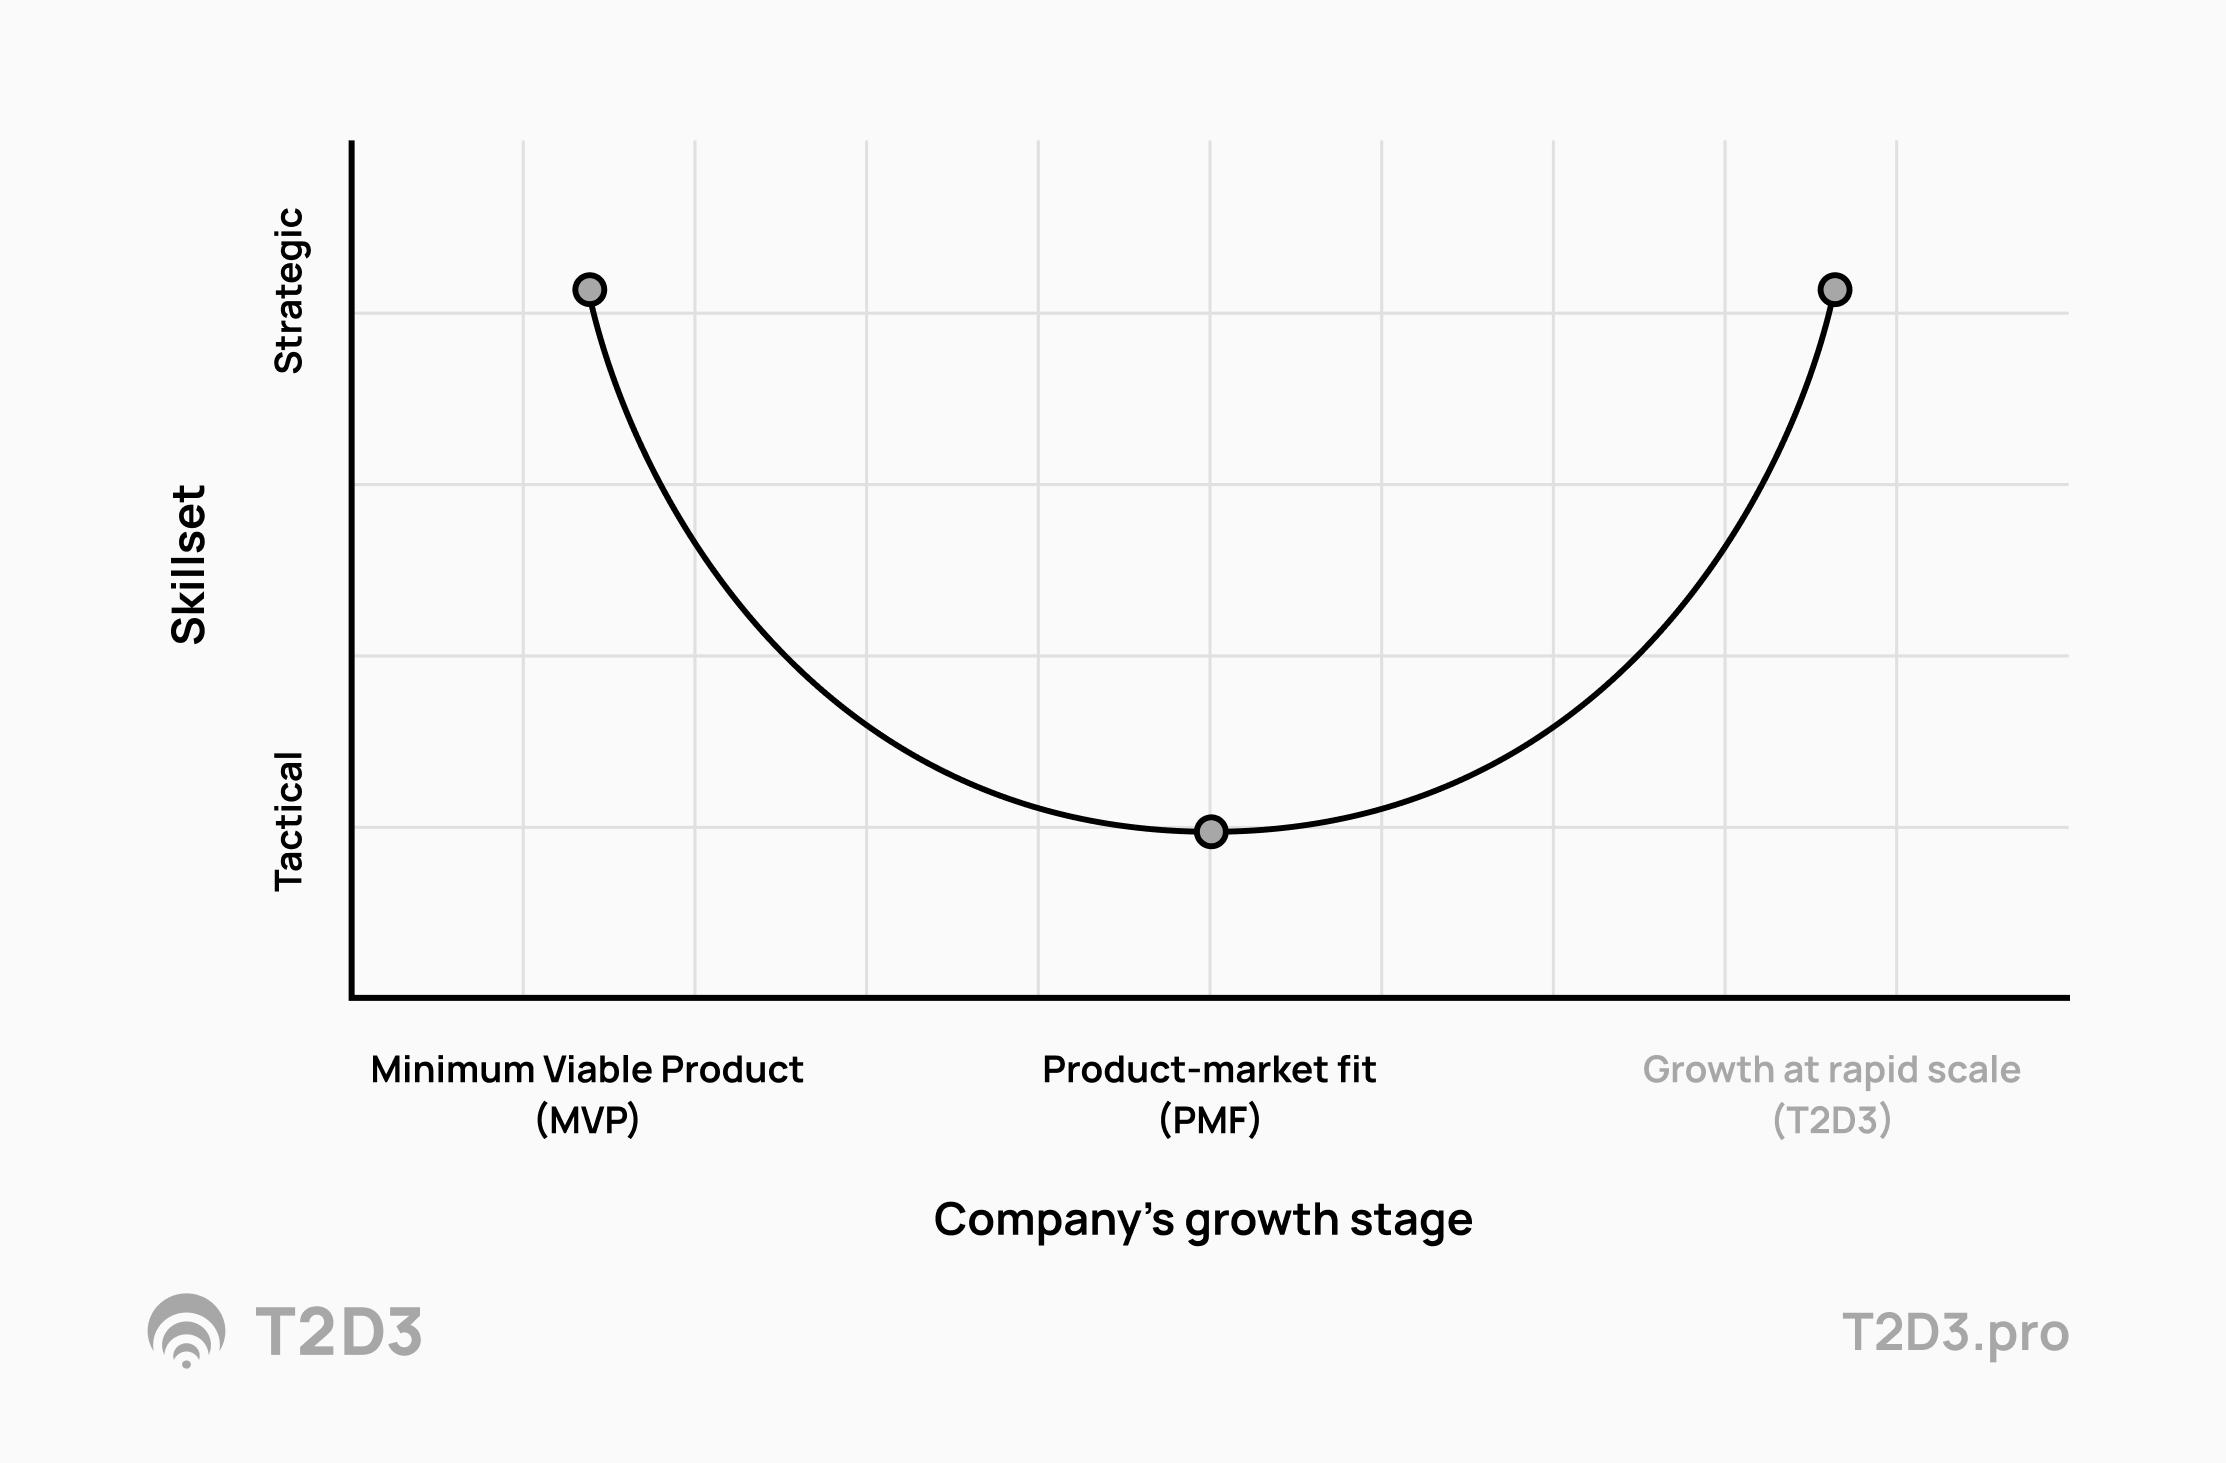 What type of strategy & tactics will work one a graph for skillset vs company growth stage